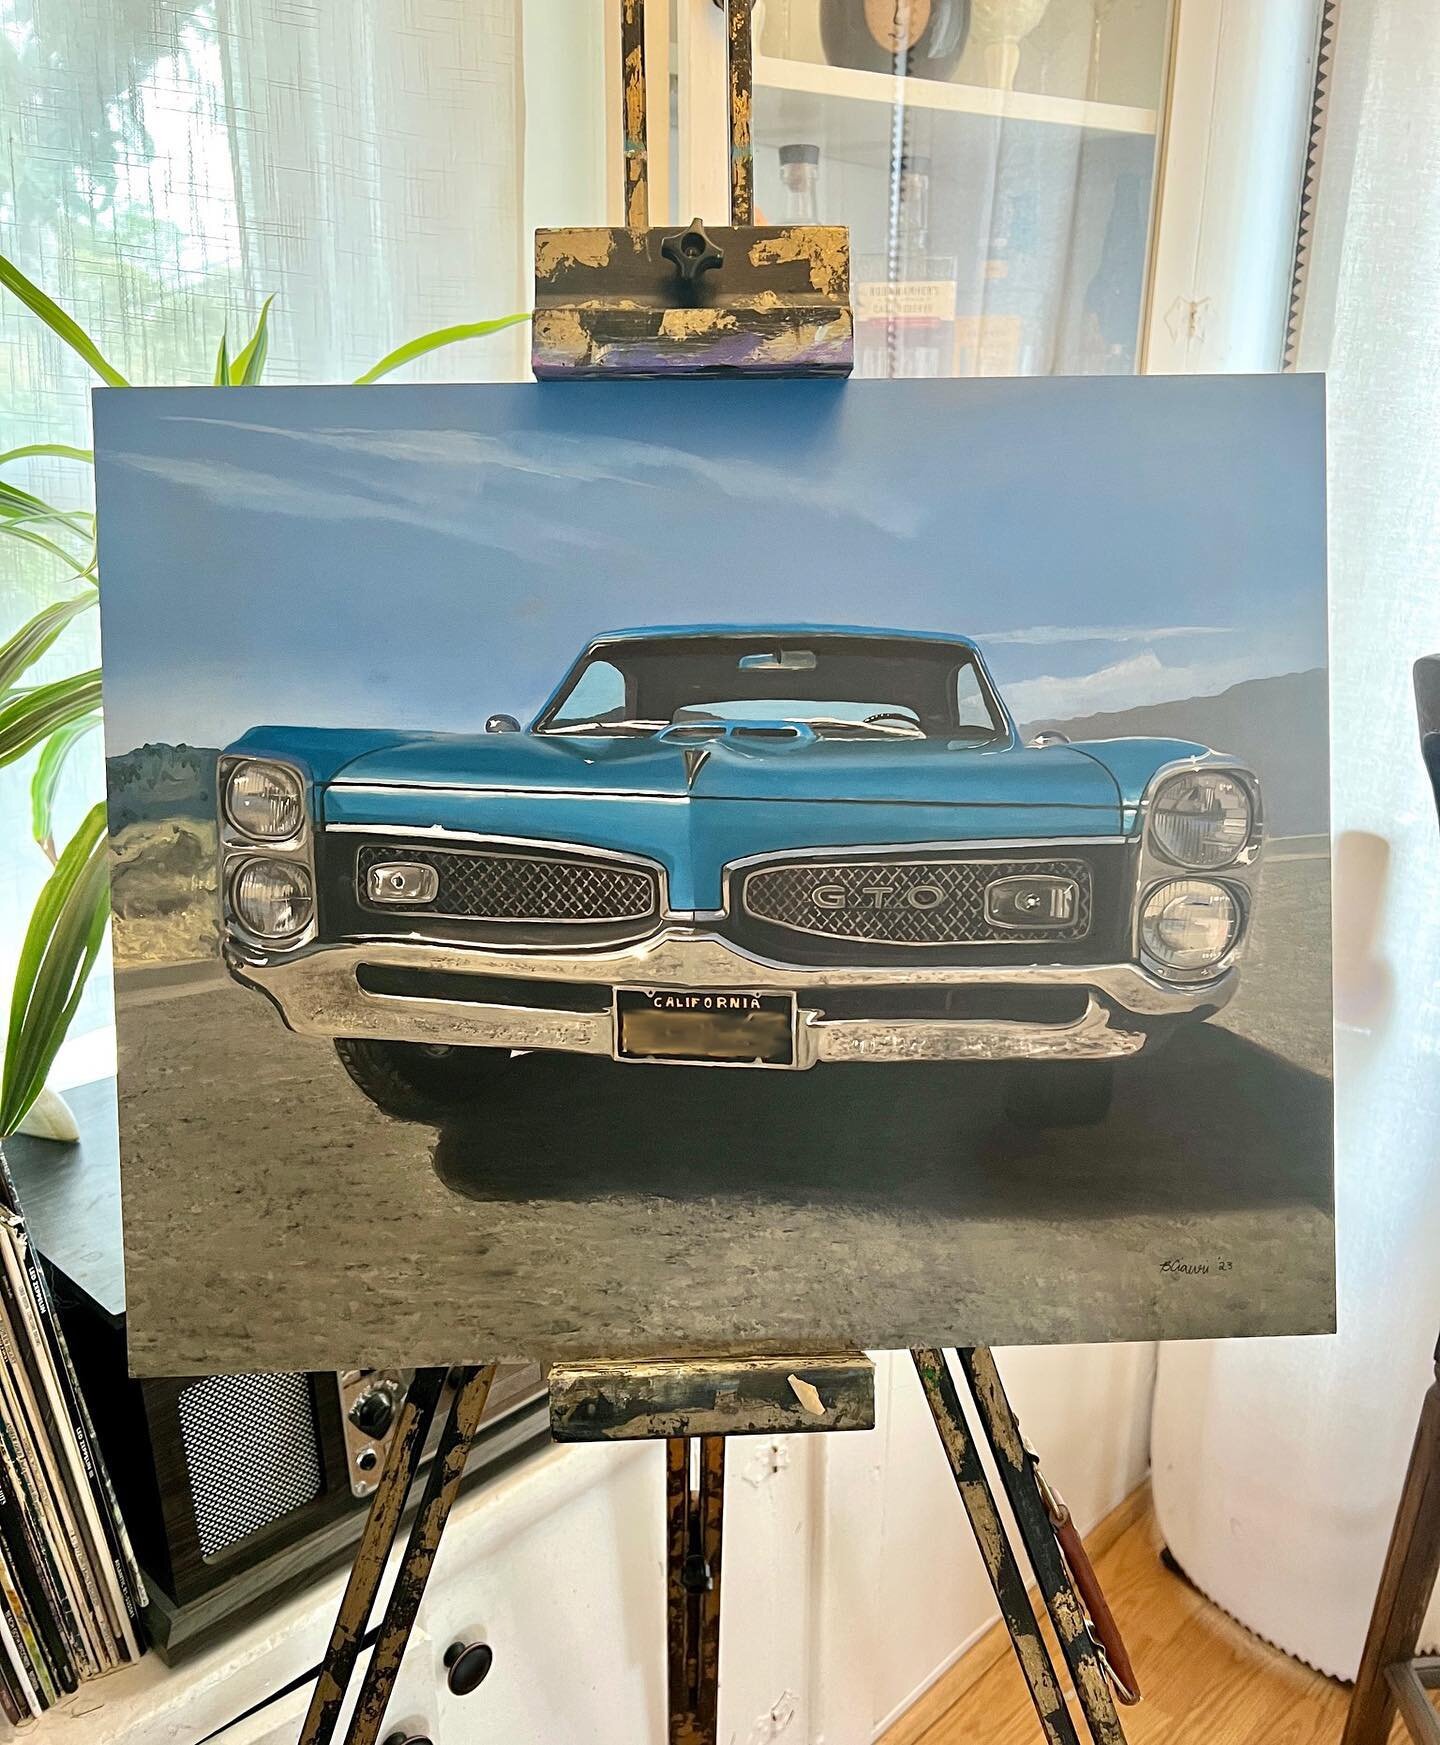 A few more pics of this piece!🚙 
(License plate blurred for privacy, I swear it looks like a license plate under all that blur)
.
.
.
.
.
.
.
.
.
.
.
.
.
.
#gto #pontiacgto #pontiac #classiccars #classiccar #oilpainting #oilartist #artistsoninstagra